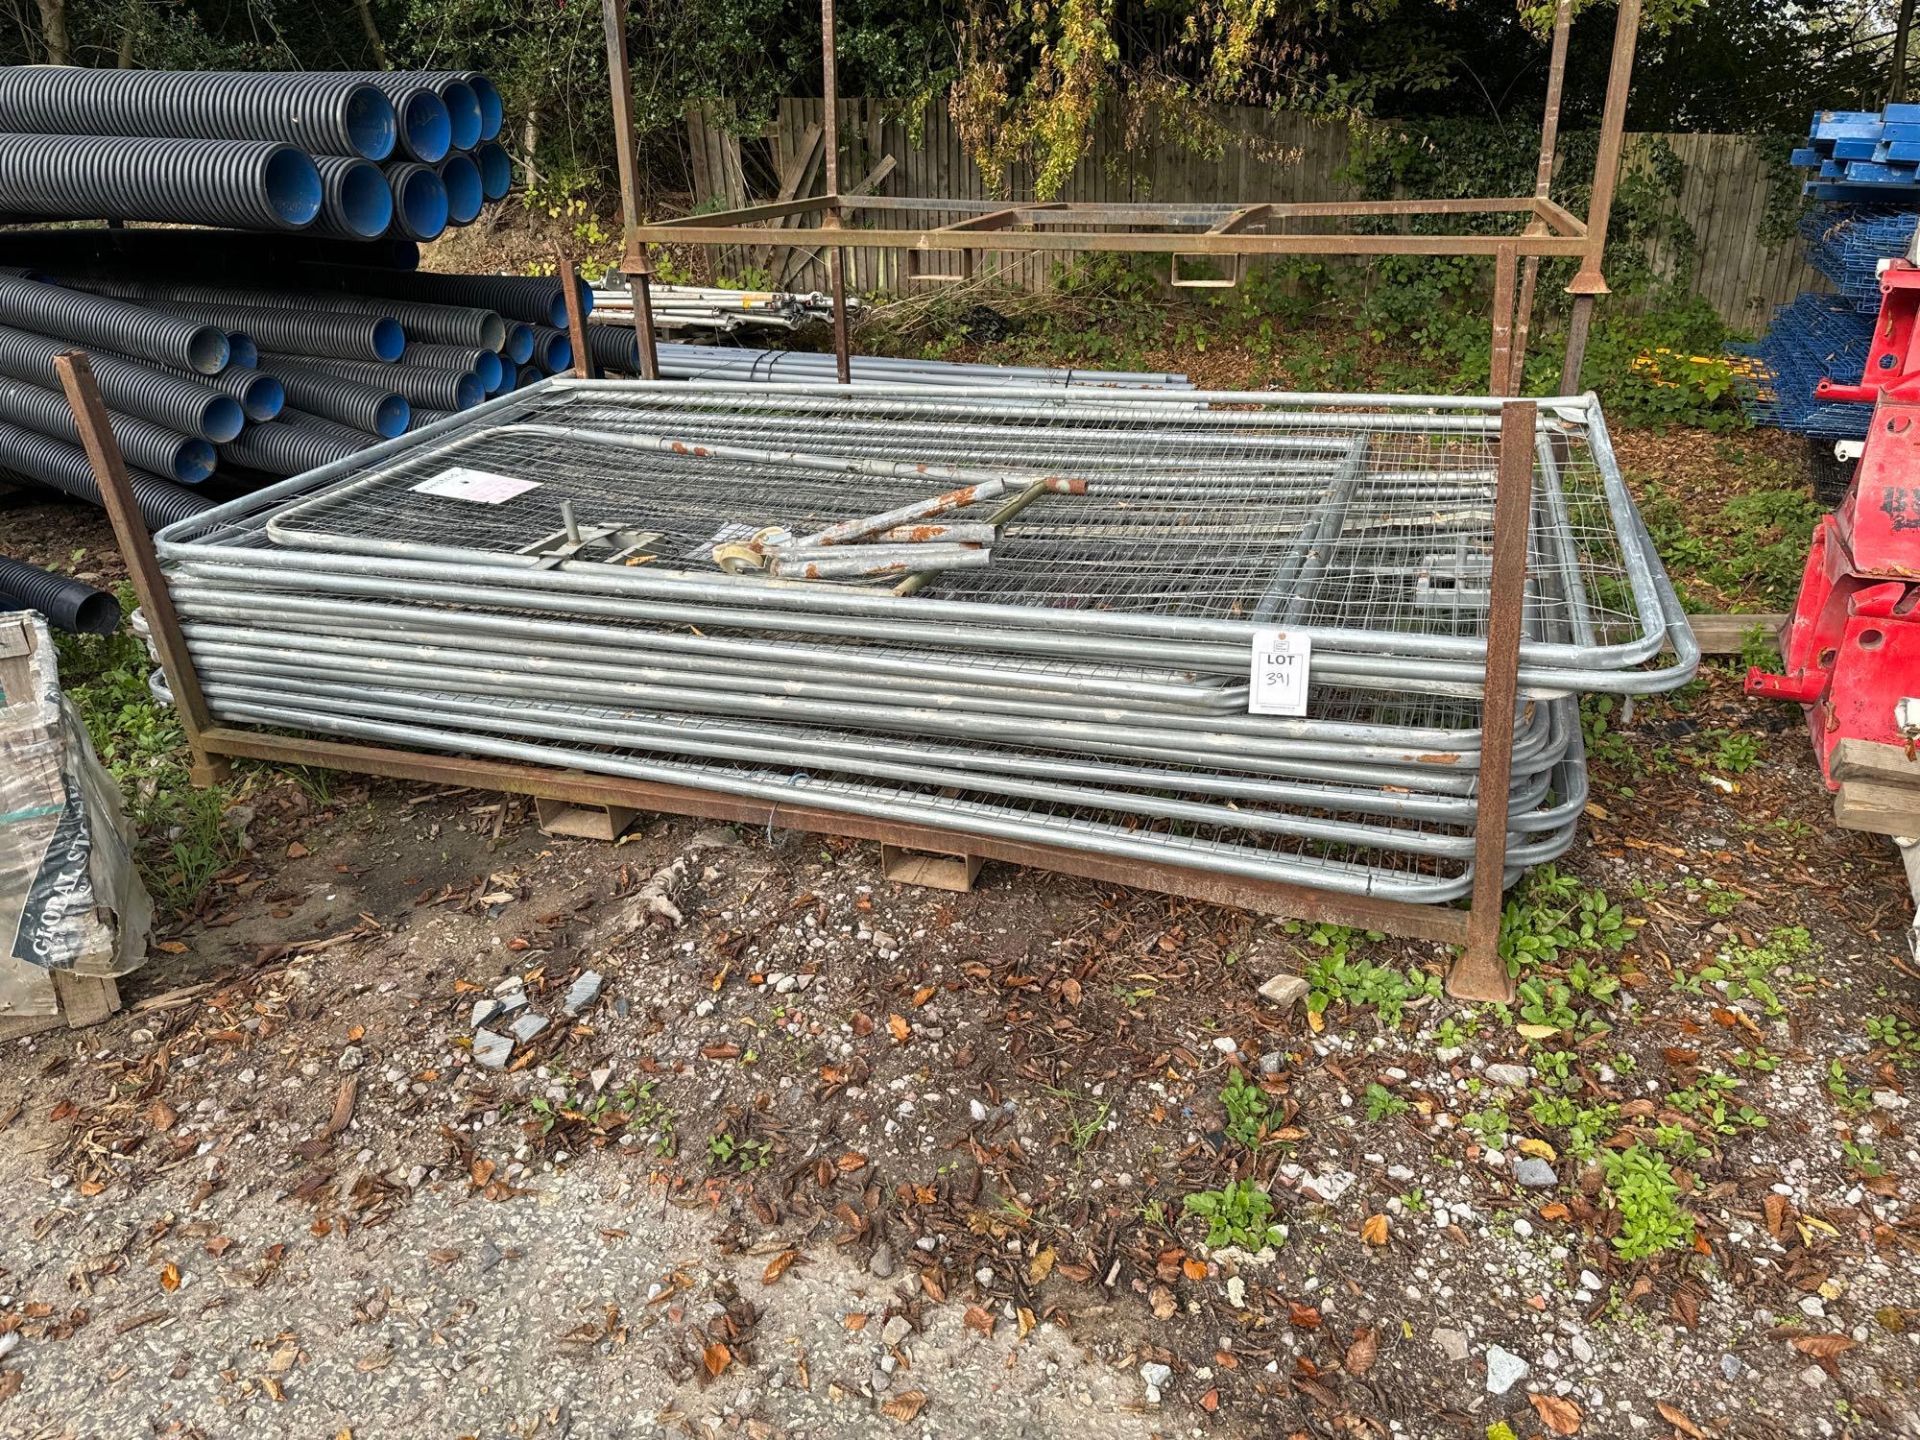 Approx 14 Harris fencing panels, access gate, transport stillage and 20 feet